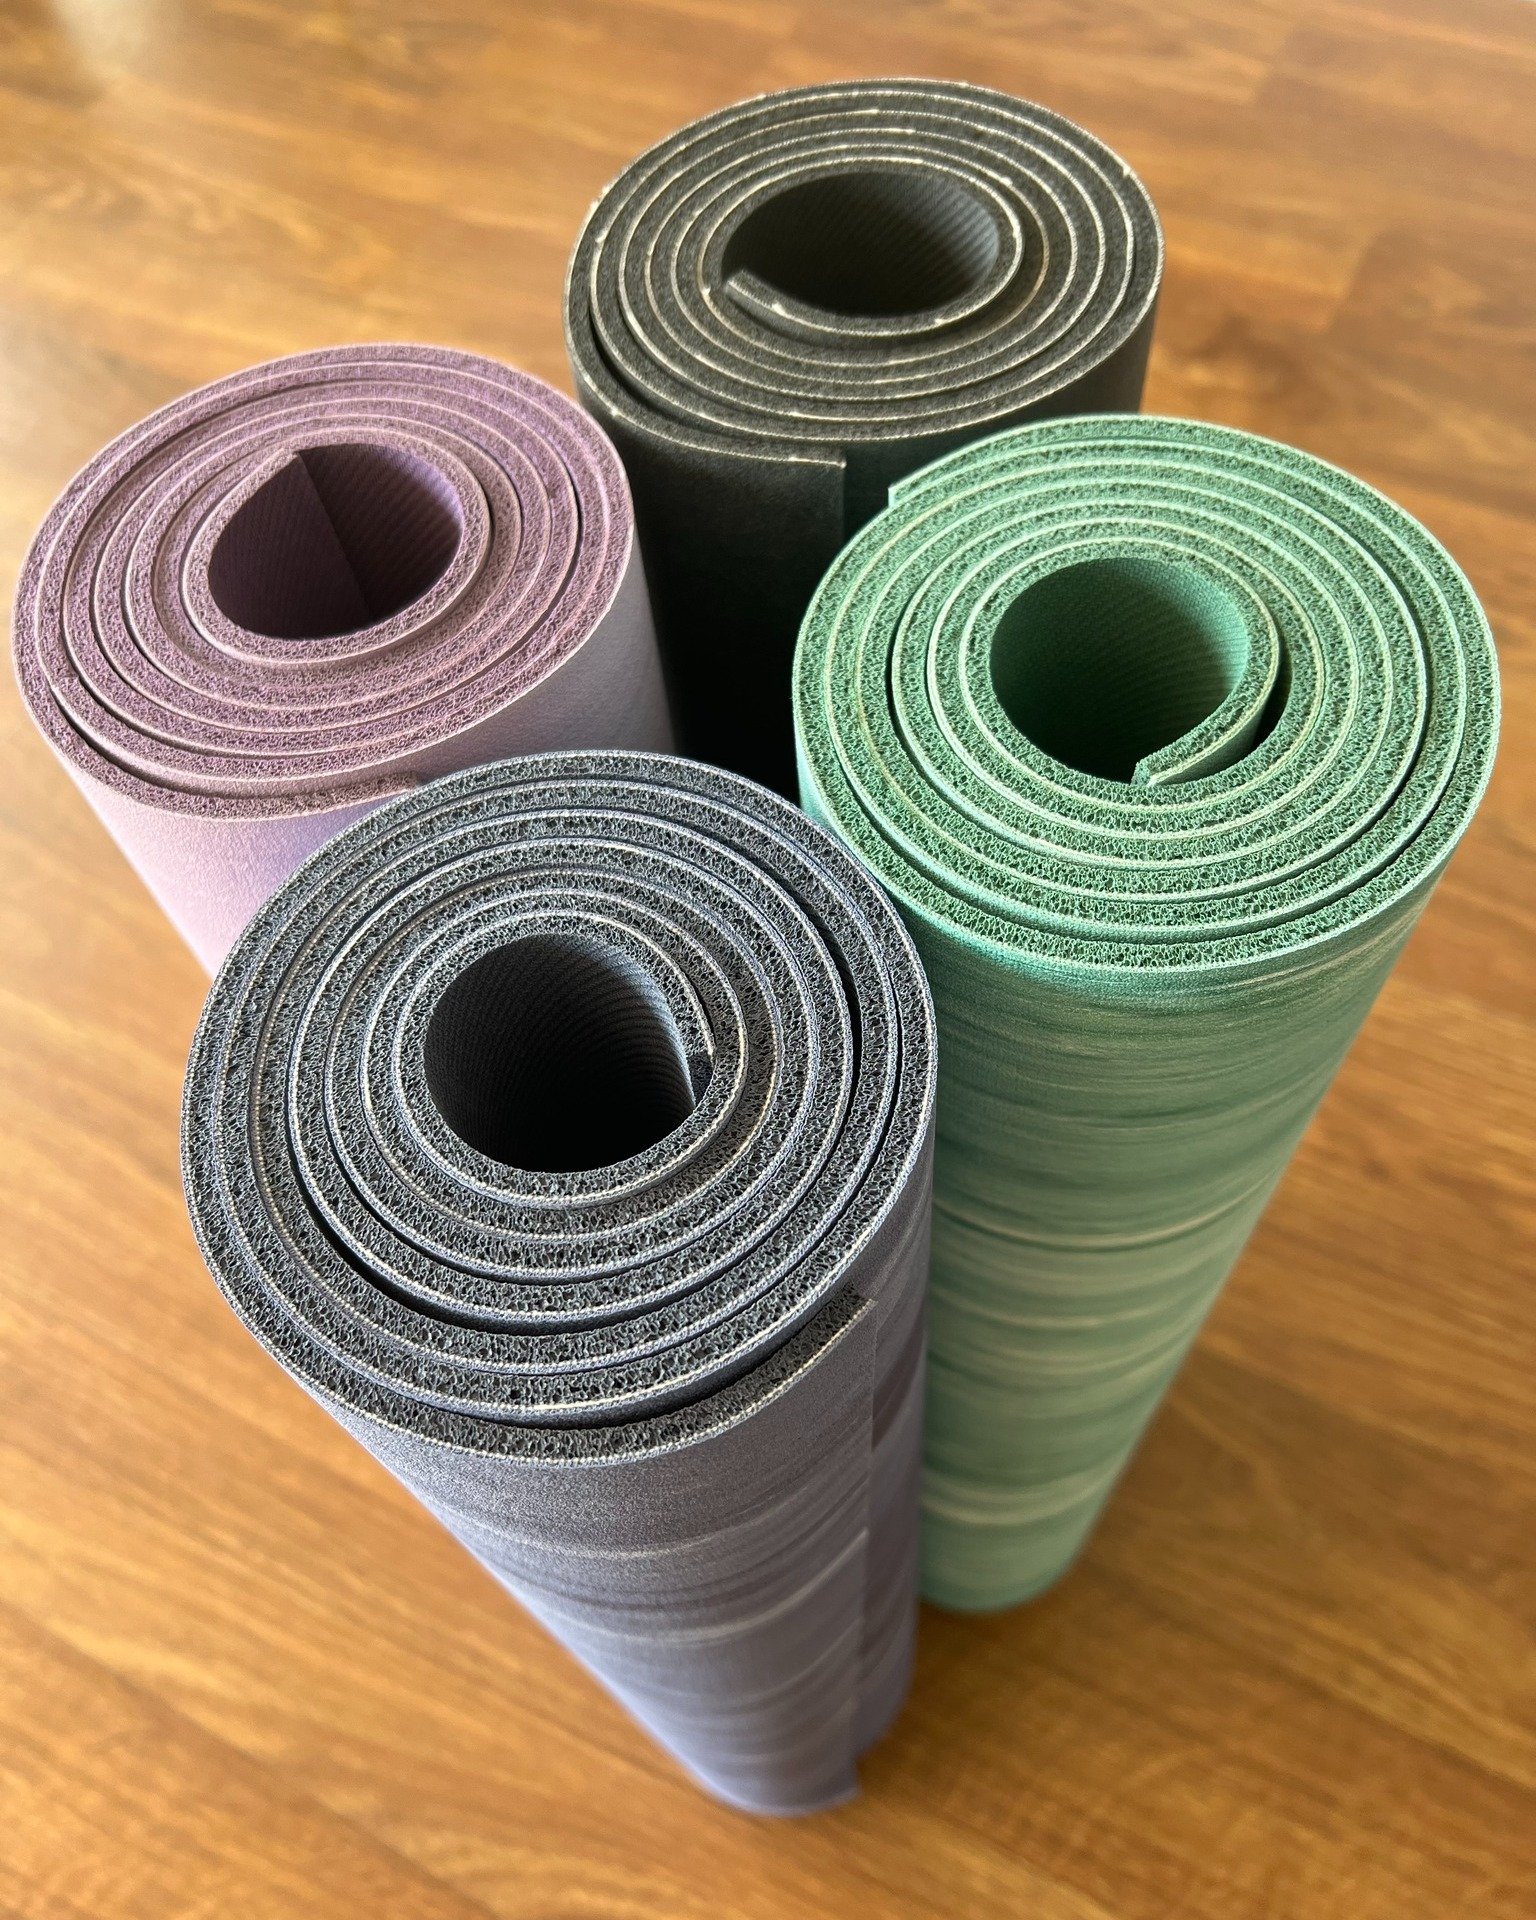 Have you checked out our new studio mats?

If you've only ever practiced on a soft, foamy, PVC mat, we'd love for you to feel the difference of practicing on a solid, sticky, natural rubber mat.

No shade to PVC mats, they're affordable, easy, and th